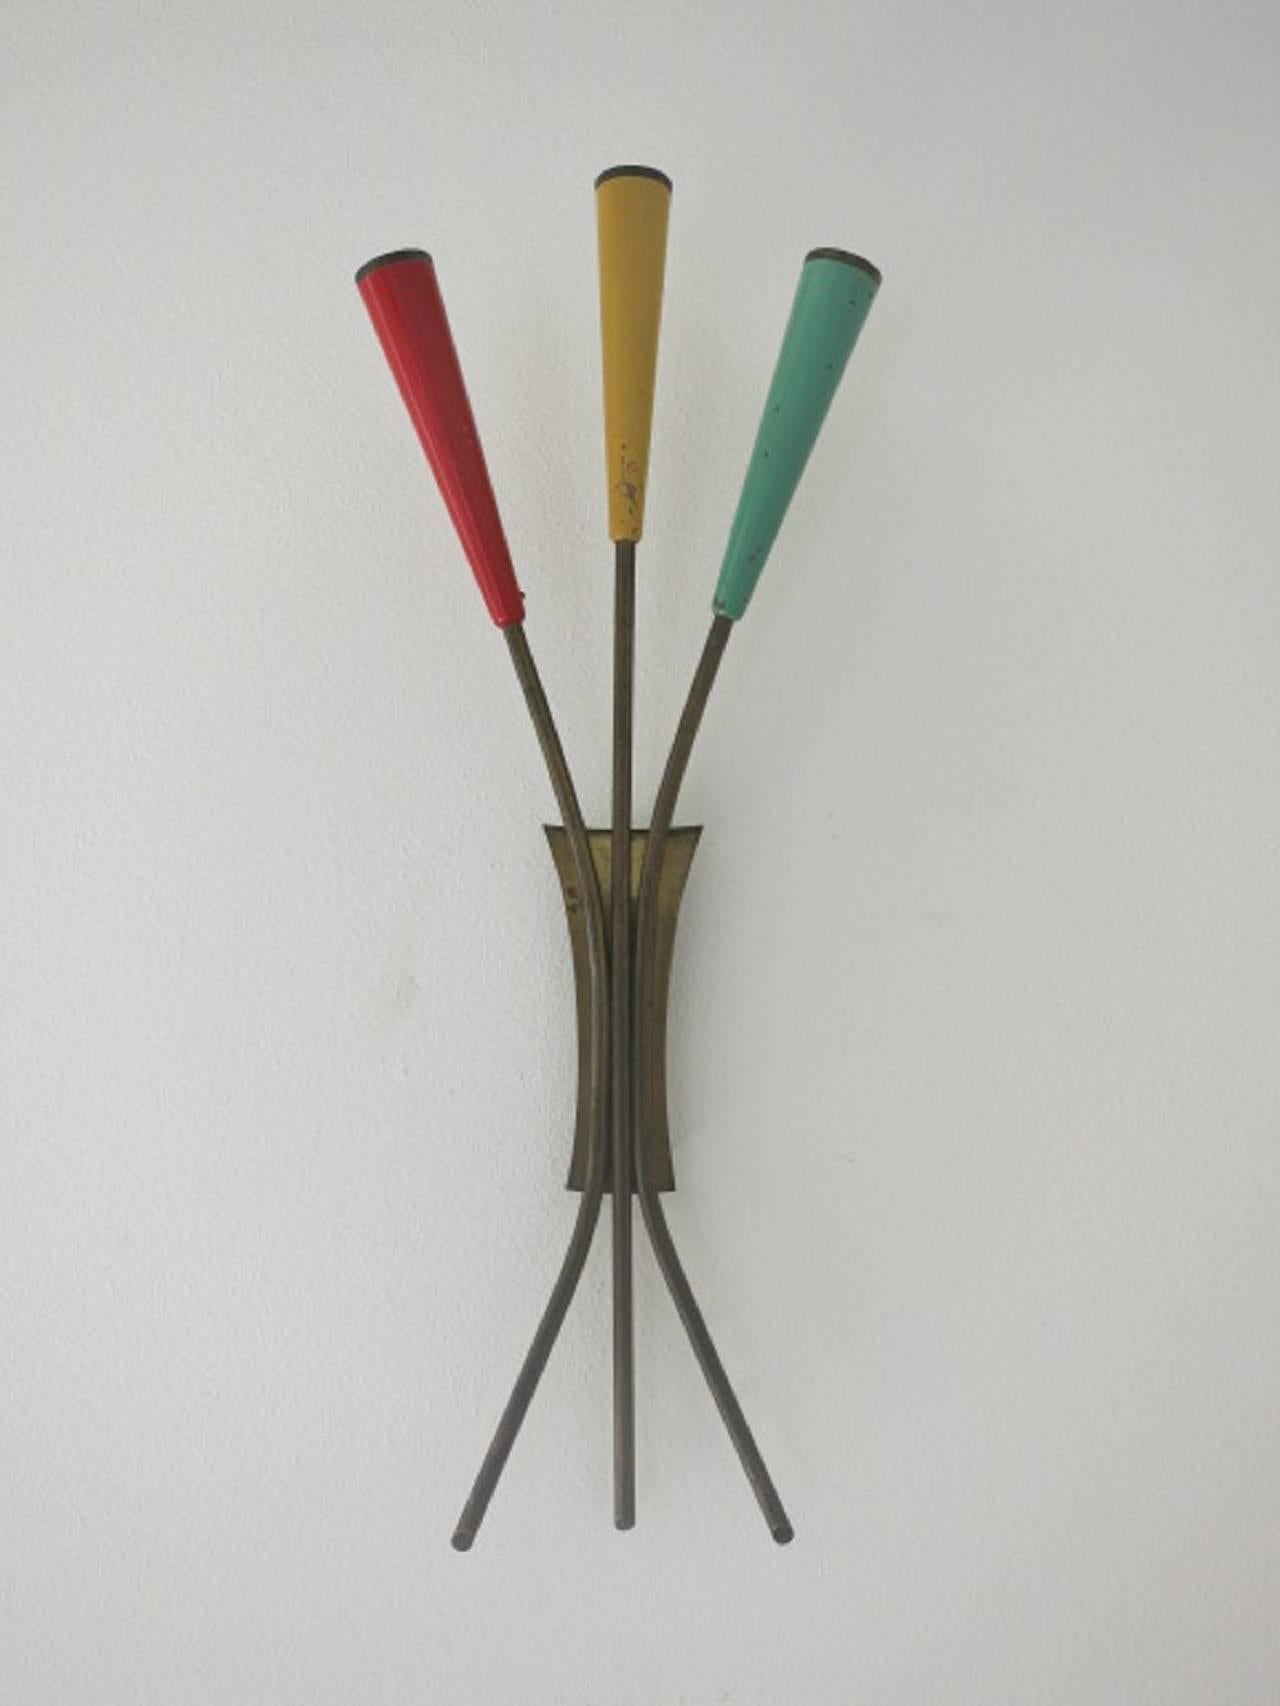 Pair of vintage Italian wall lights with red, green and yellow enameled brass / Designed by Stilnovo, circa 1950’s / Made in Italy
3 lights / E12 or E14 type / max 40W each
Height: 21.5 inches / Width: 8.5 inches / Depth: 2 inches
1 pair in stock in